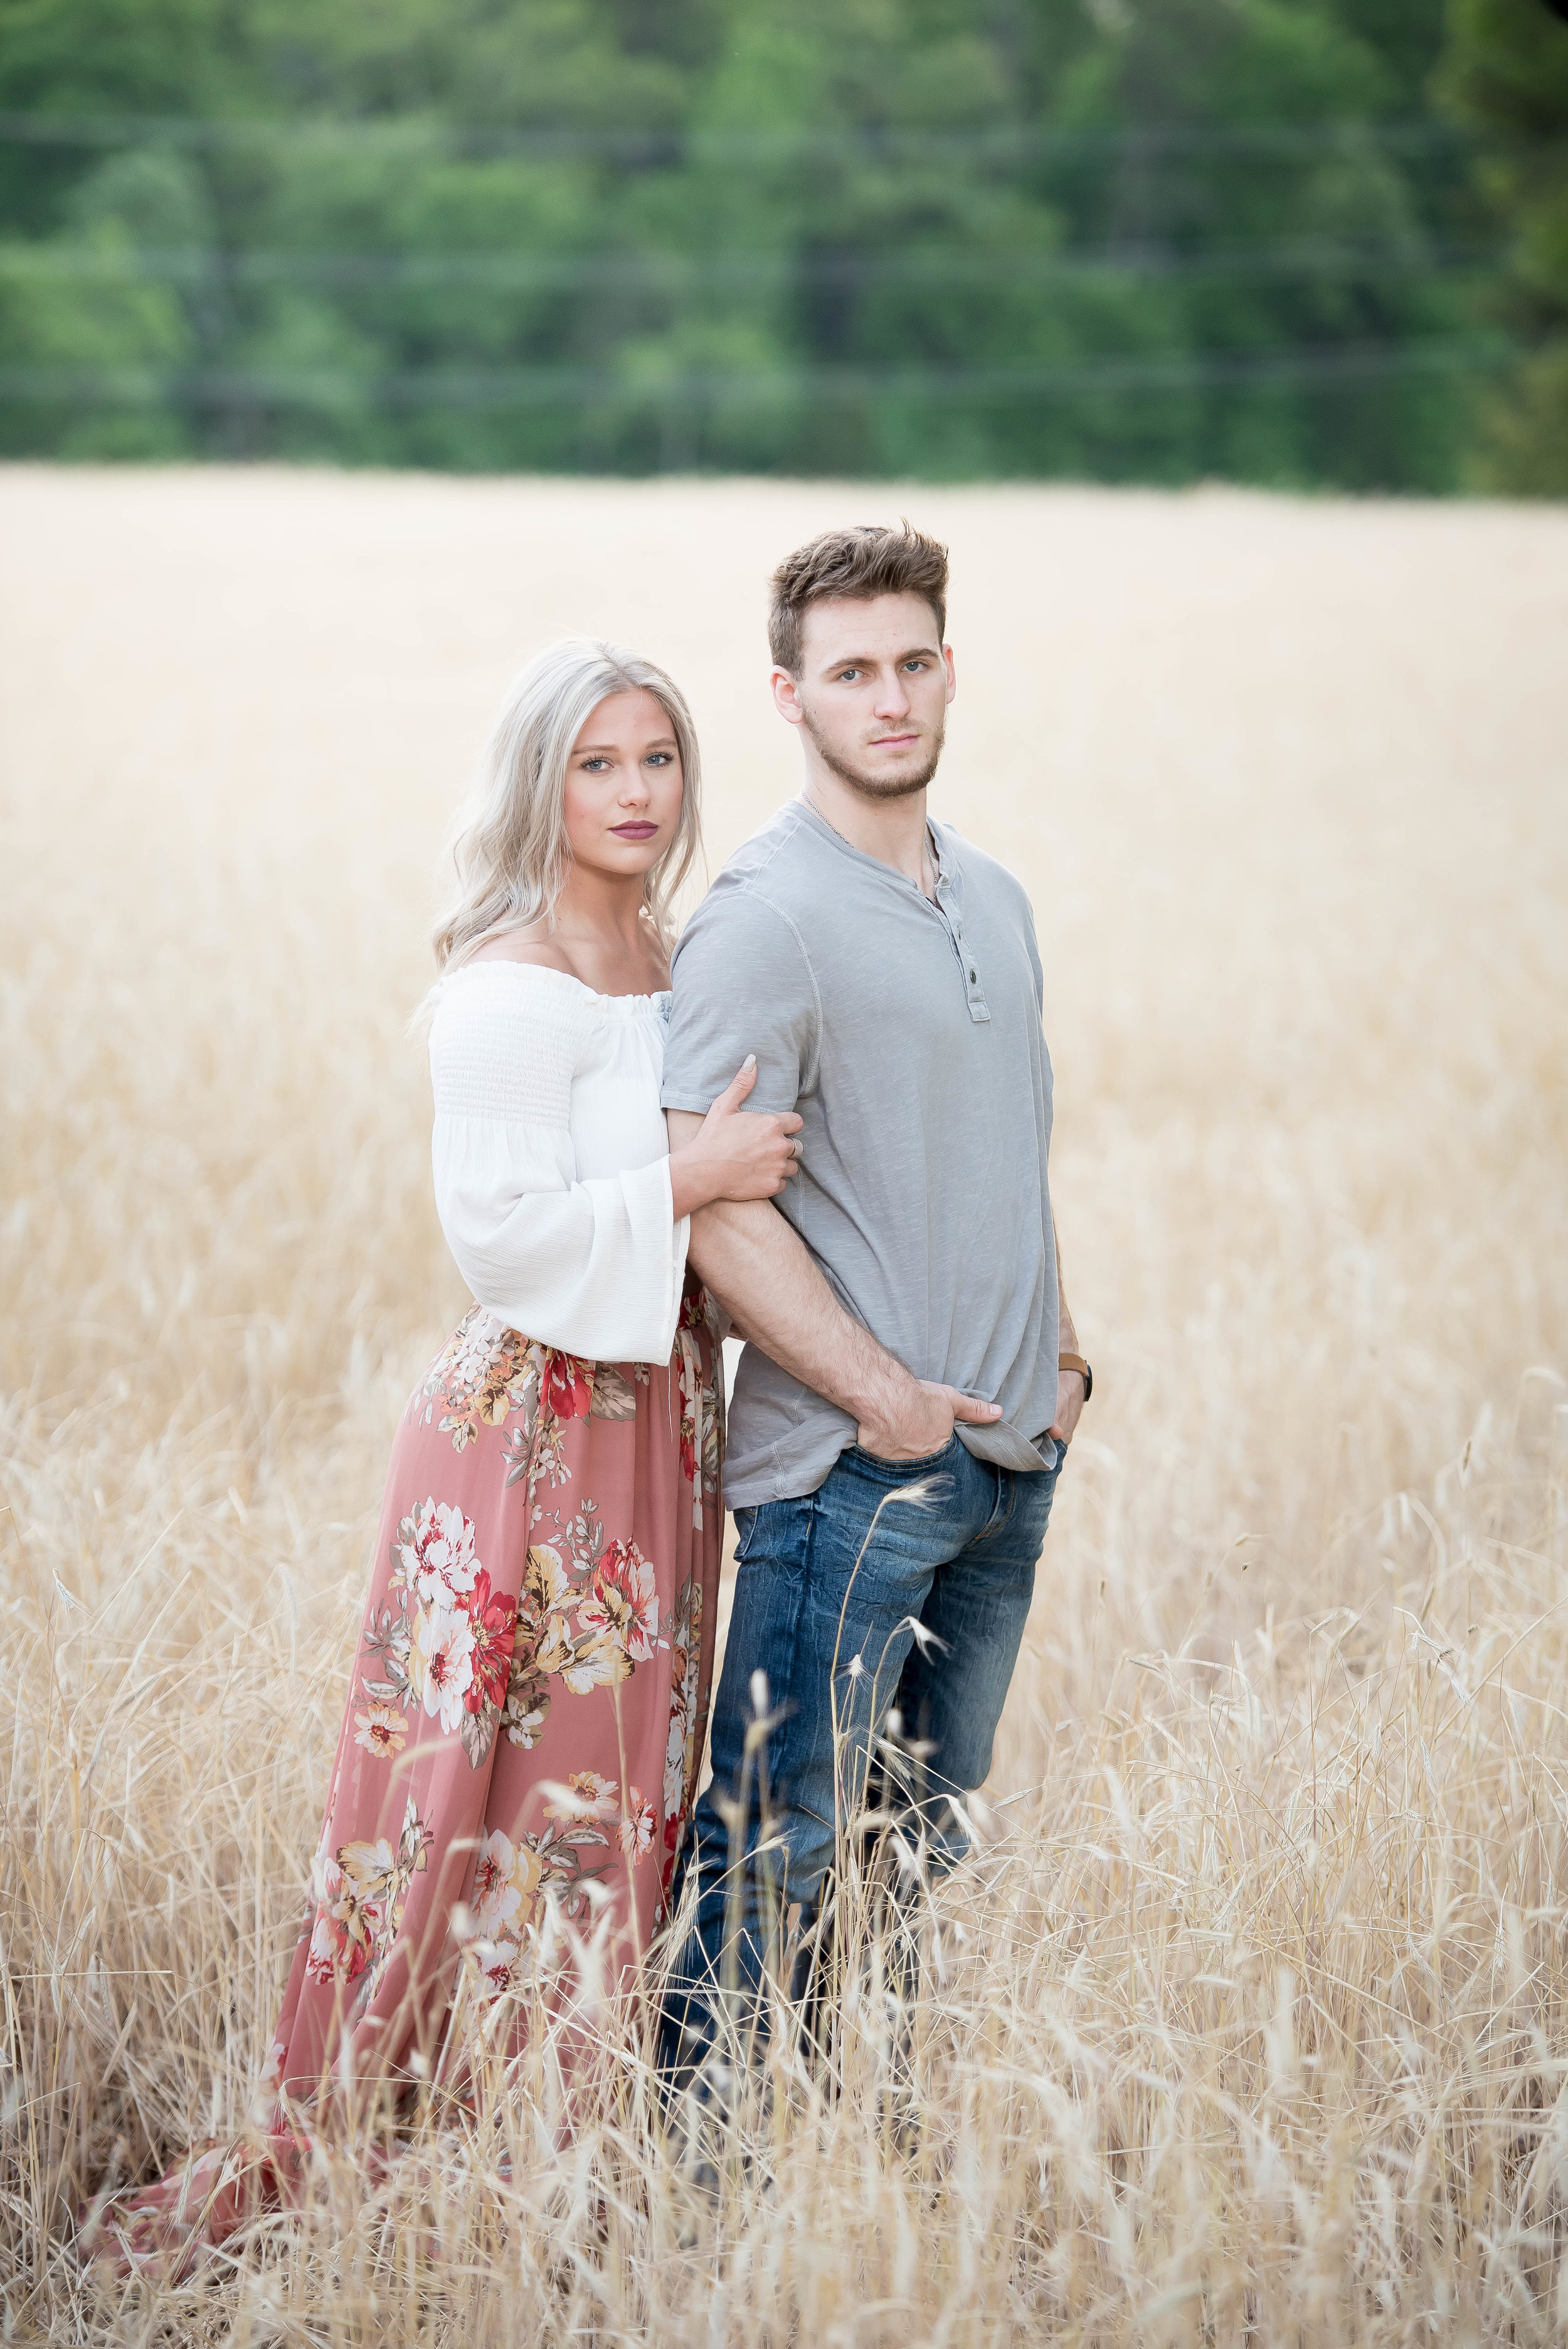 Couple Session - Fitness Couples - Tall Grass Field - Engagement Portrait Ideas - Engagement Session Ideas - Couple Session Ideas - Spring Picture Ideas-12.jpg